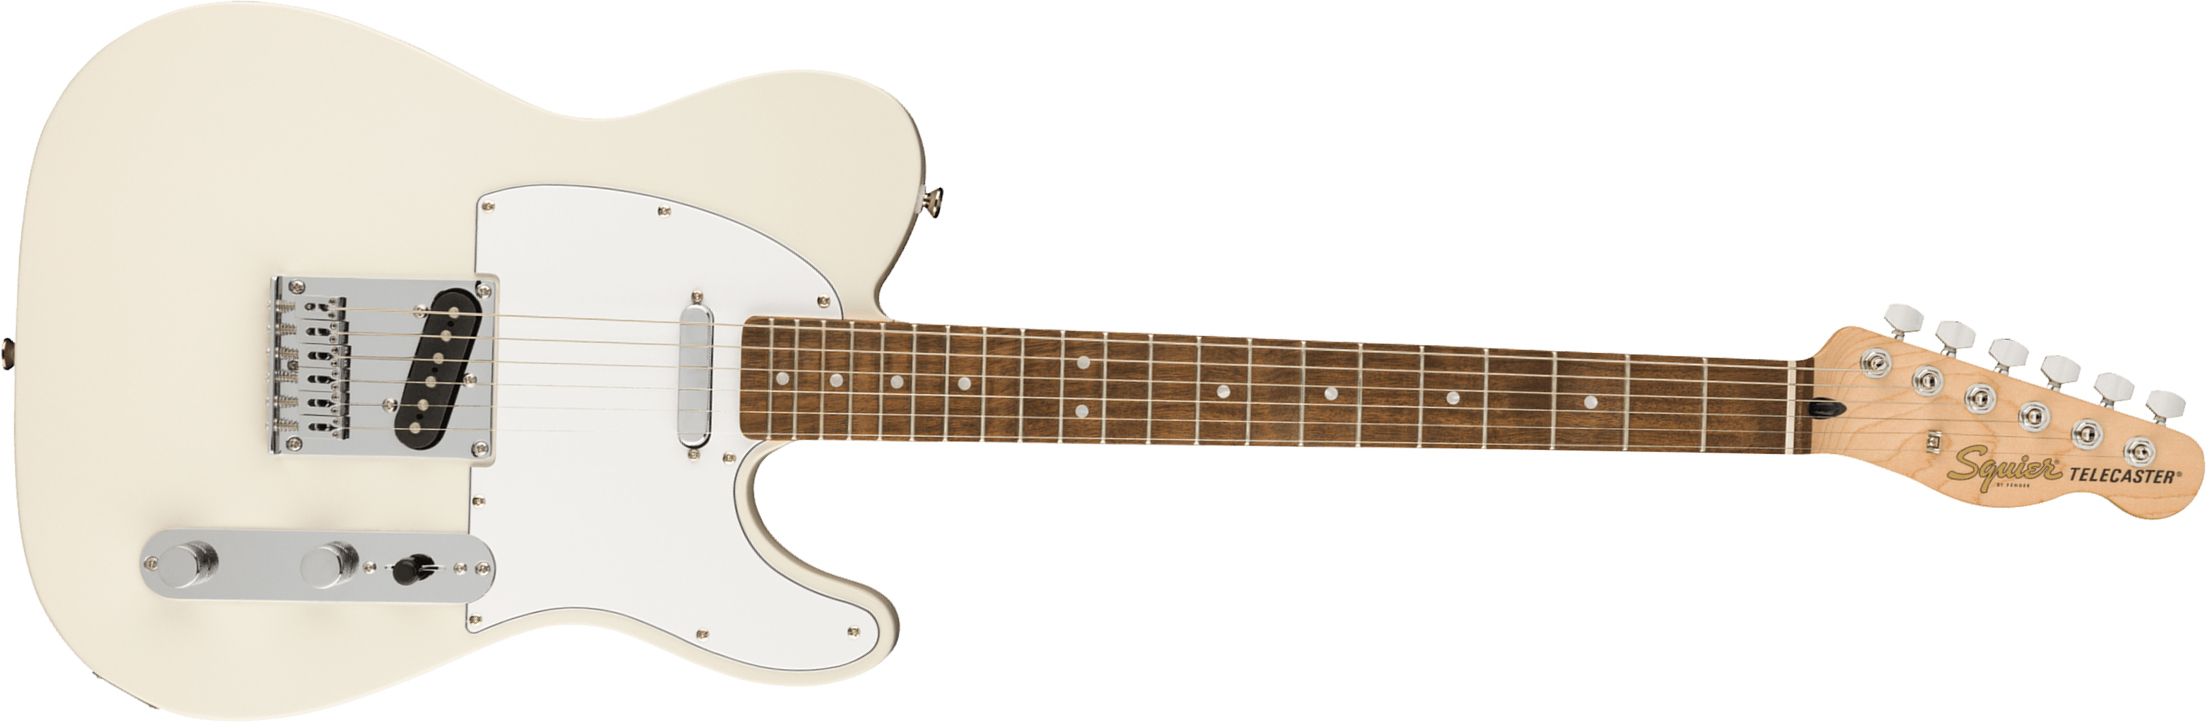 Squier Tele Affinity 2021 2s Lau - Olympic White - Tel shape electric guitar - Main picture